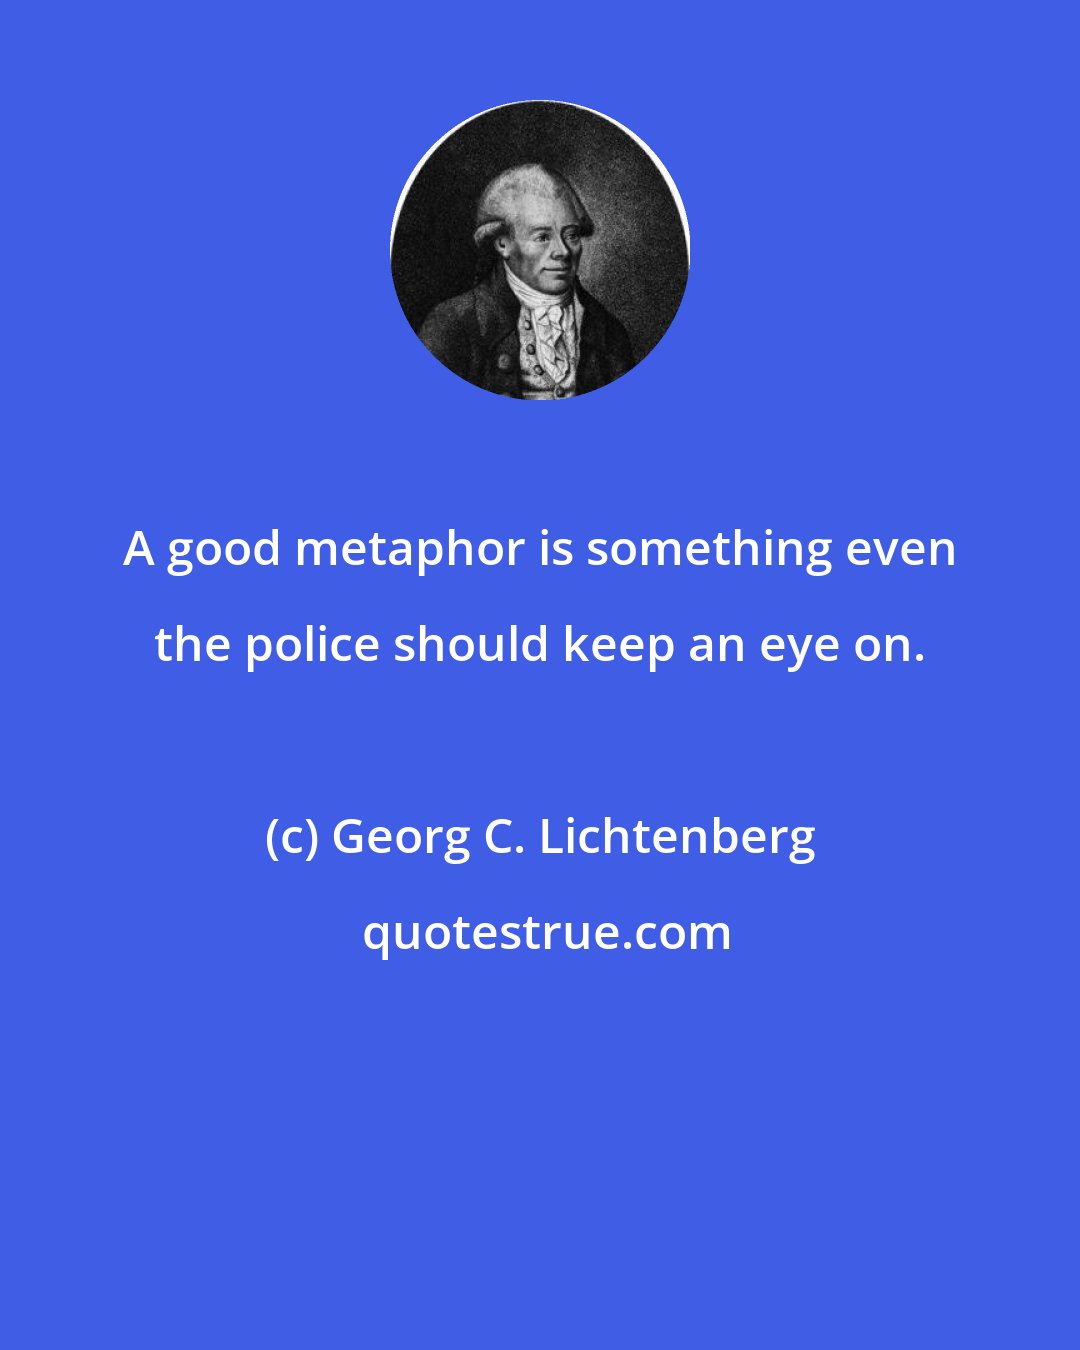 Georg C. Lichtenberg: A good metaphor is something even the police should keep an eye on.